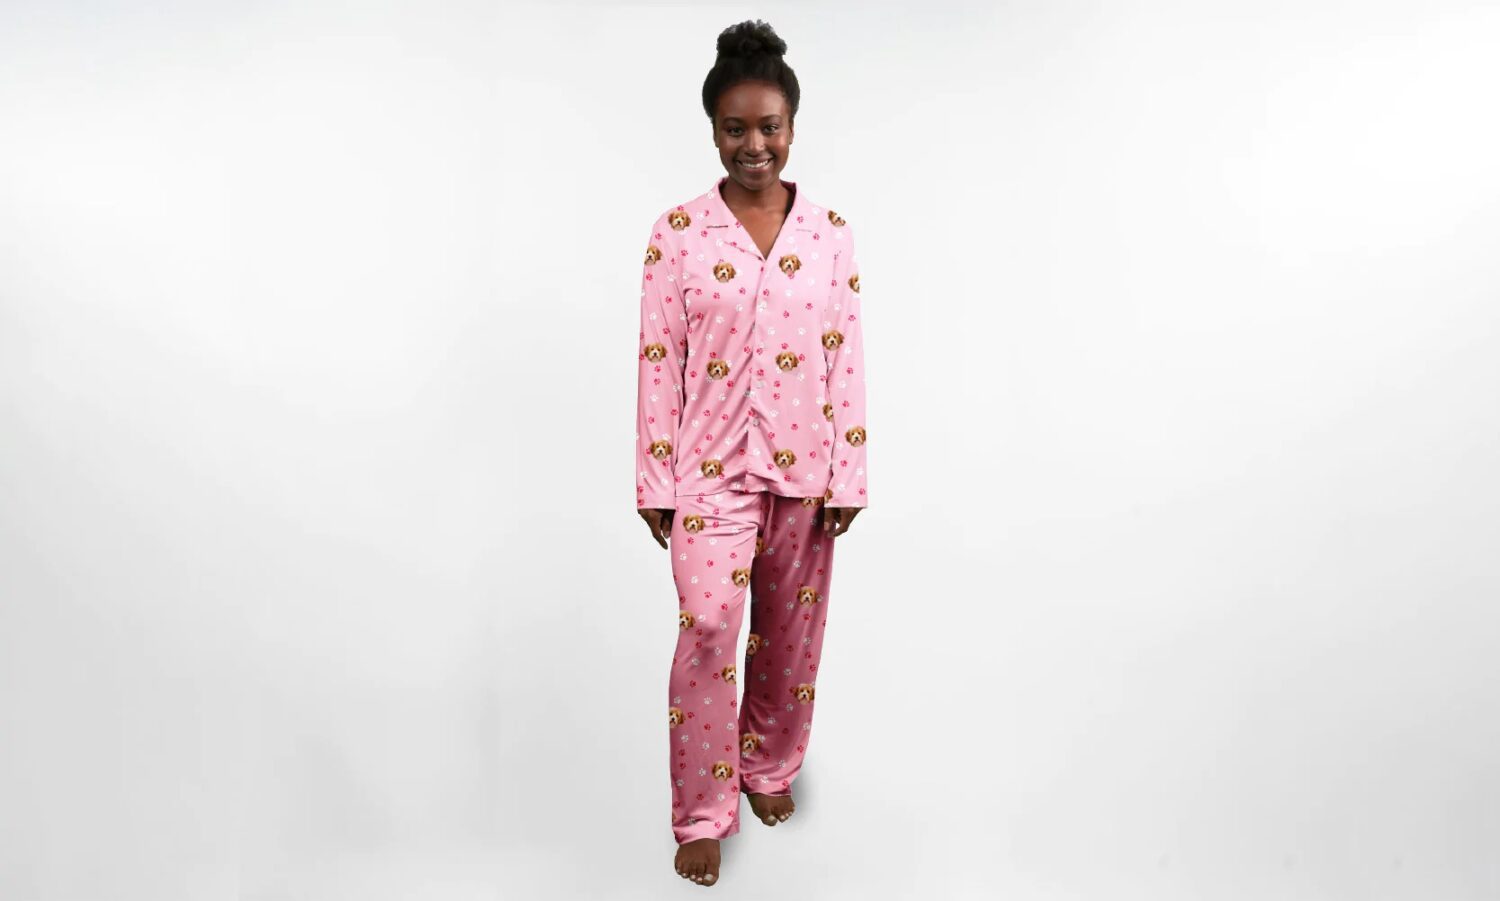 woman with images of her dog on her pajamas